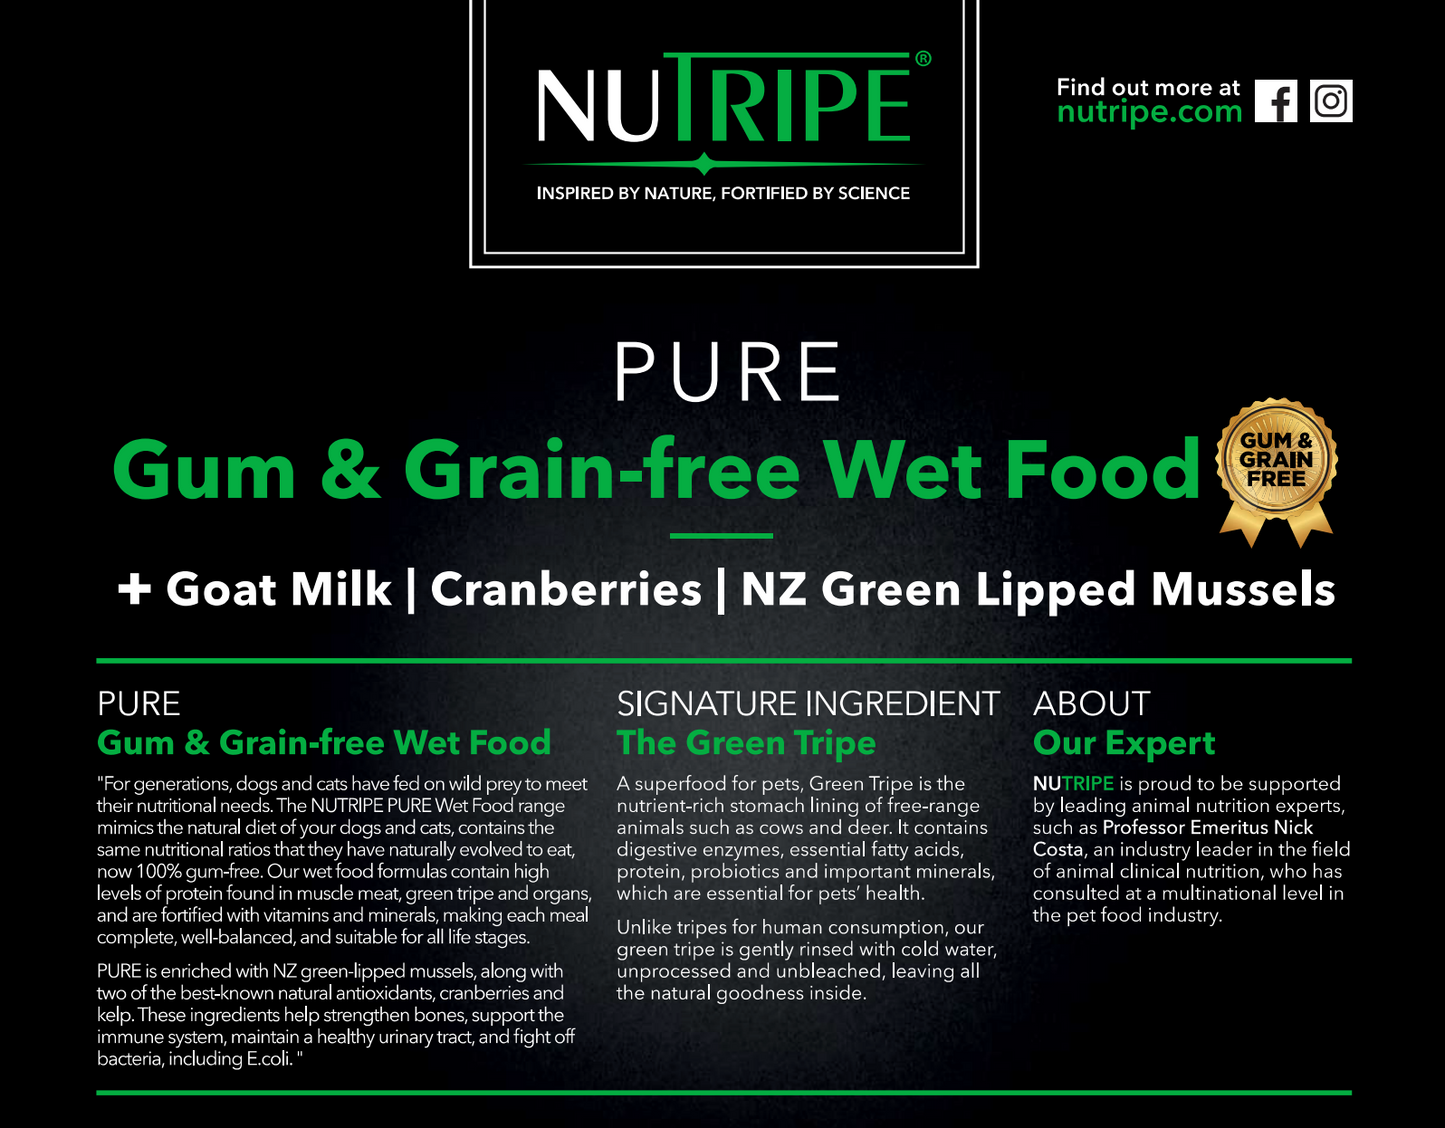 Your Whole Dog NUTRIPE PURE Lamb & Green Tripe Dog Food (185g cans) gum & grain free wet food.